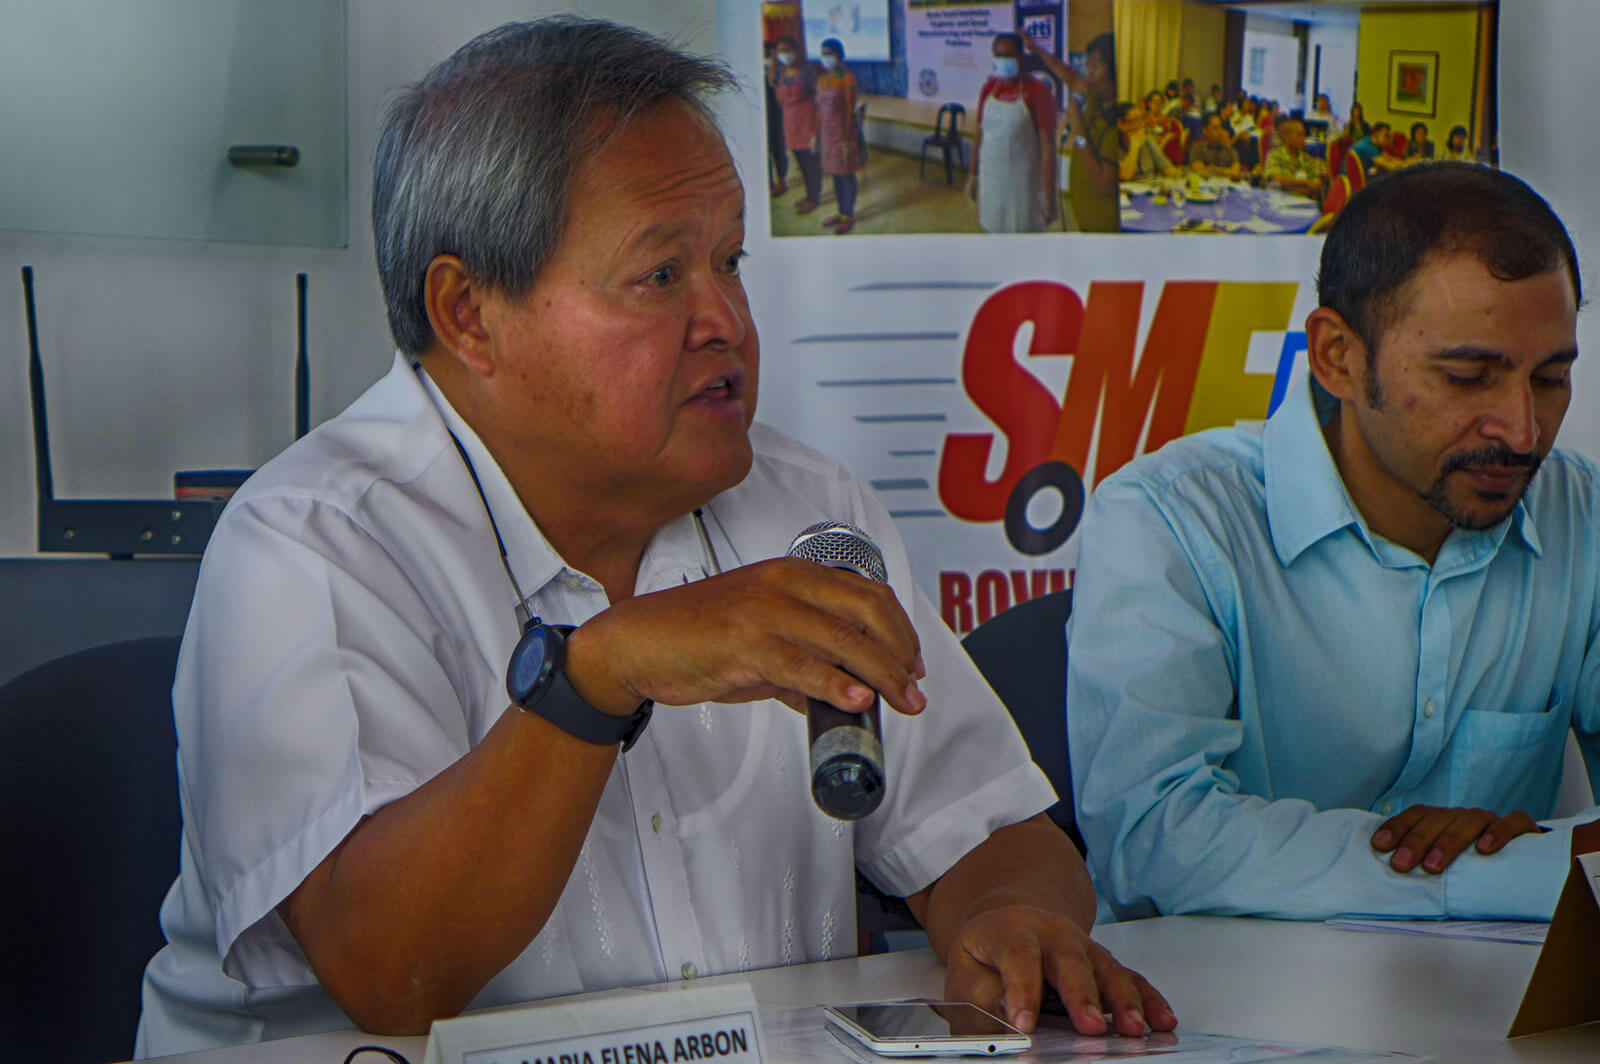 JOEL MARI YU. The former Cebu Investment Promotions Center head is back as business advisor of incoming Cebu City Mayor Tomas Osmeña. Yu is shown above with Ravi Agarwal of The Tide co-working space during the press conference for the upcoming Slingshot event in Cebu (see separate story). (Photo: MyCebu.ph)